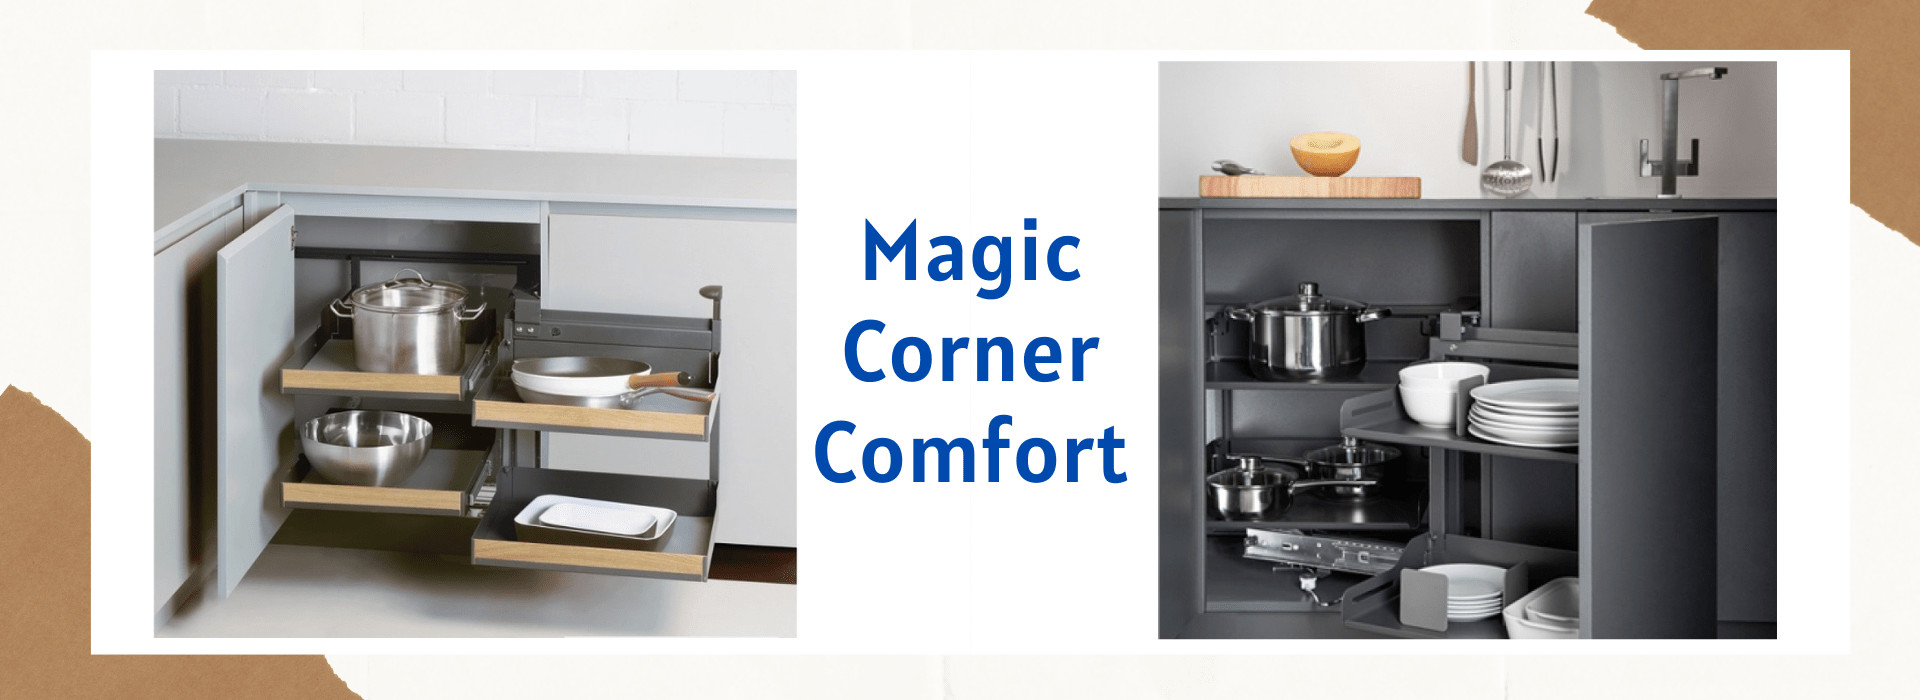 How Magic Corner Comfort Can Maximize Your Kitchen Storage Space